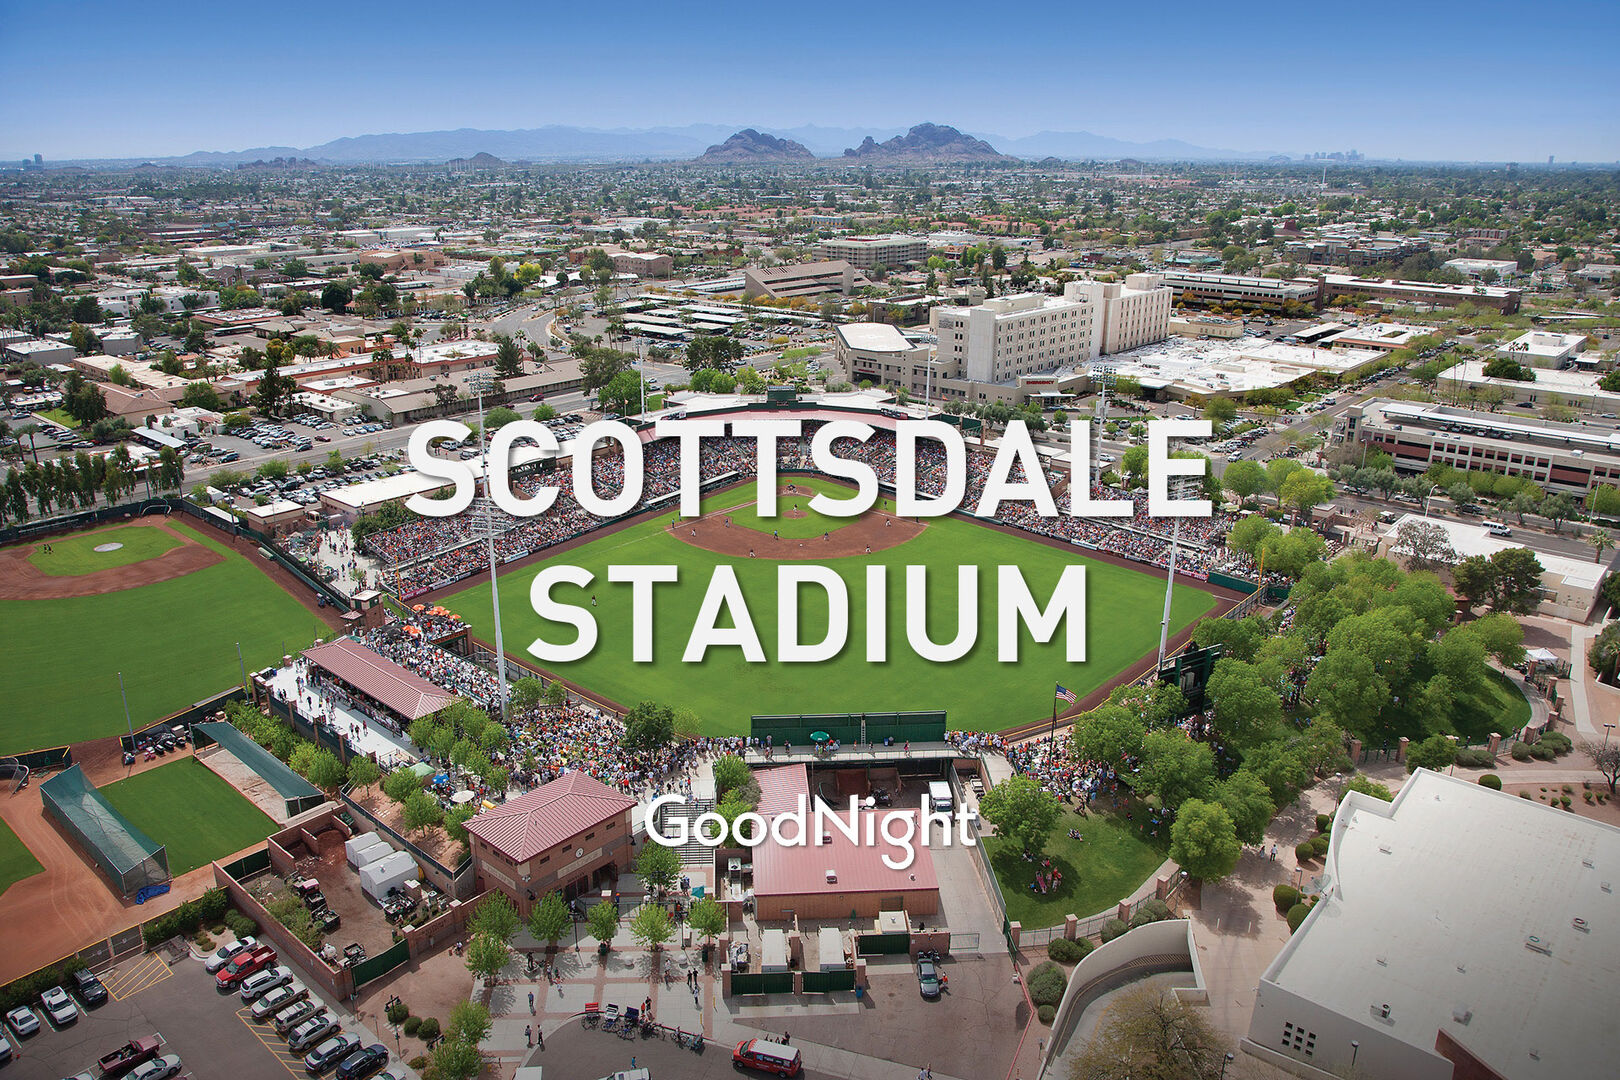 5 min to Scottsdale Stadium - Home of the San Francisco Giants during Spring Training 2023